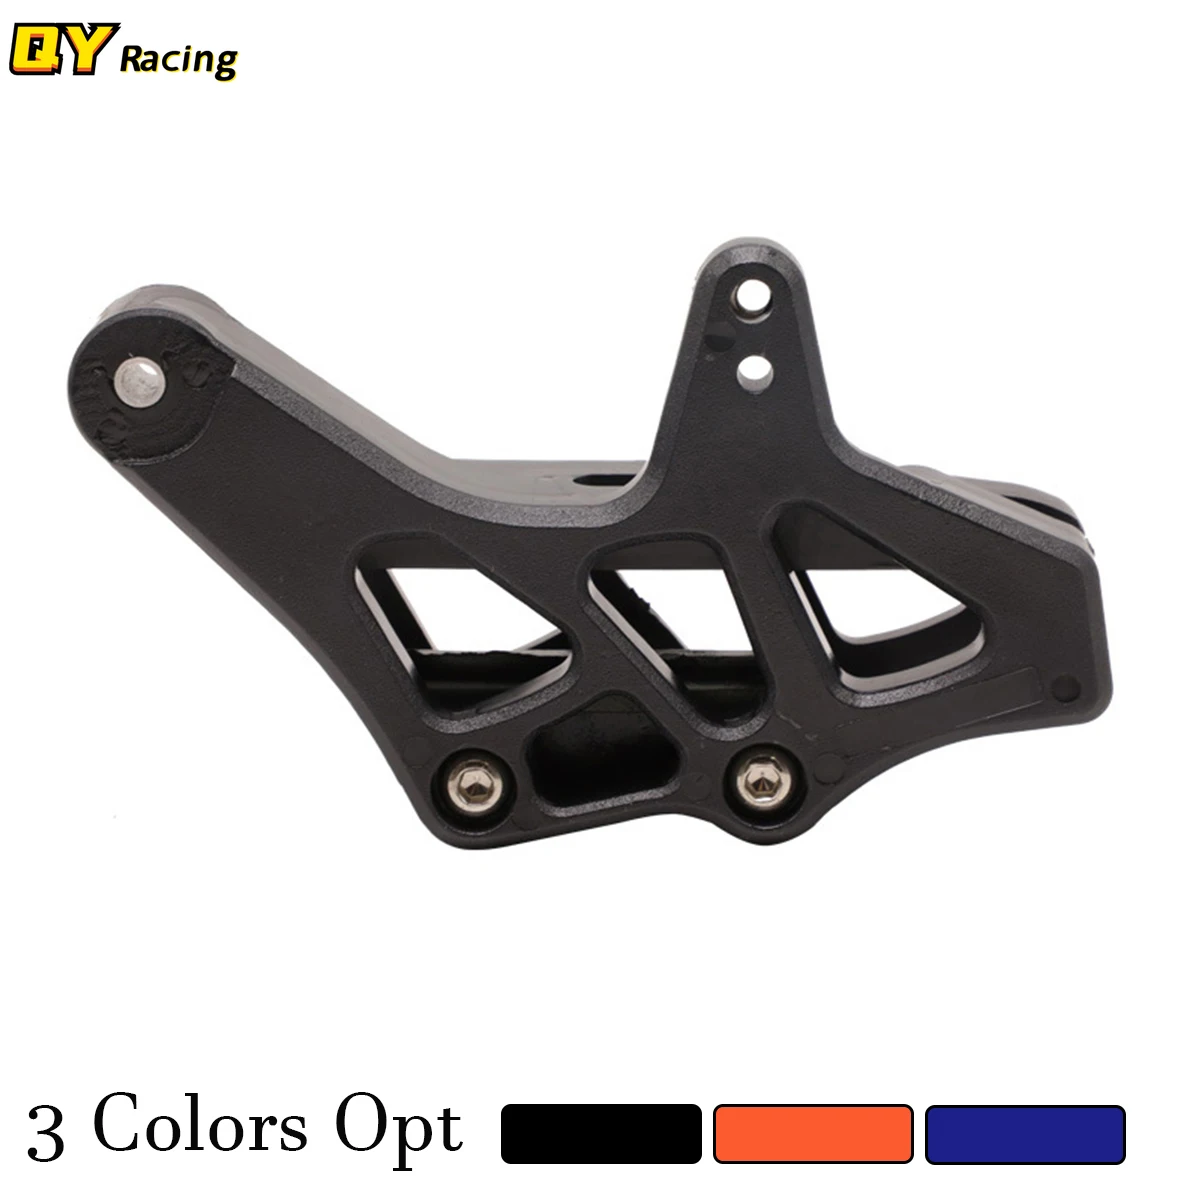 

Motorcycle Chain Guide Guard For KTM EXC EXC-F XC XC-W XC-F SX SX-F TPI 125-530 2008-2020 690 SMC R ABS ENDURO R ABS 2010-2014